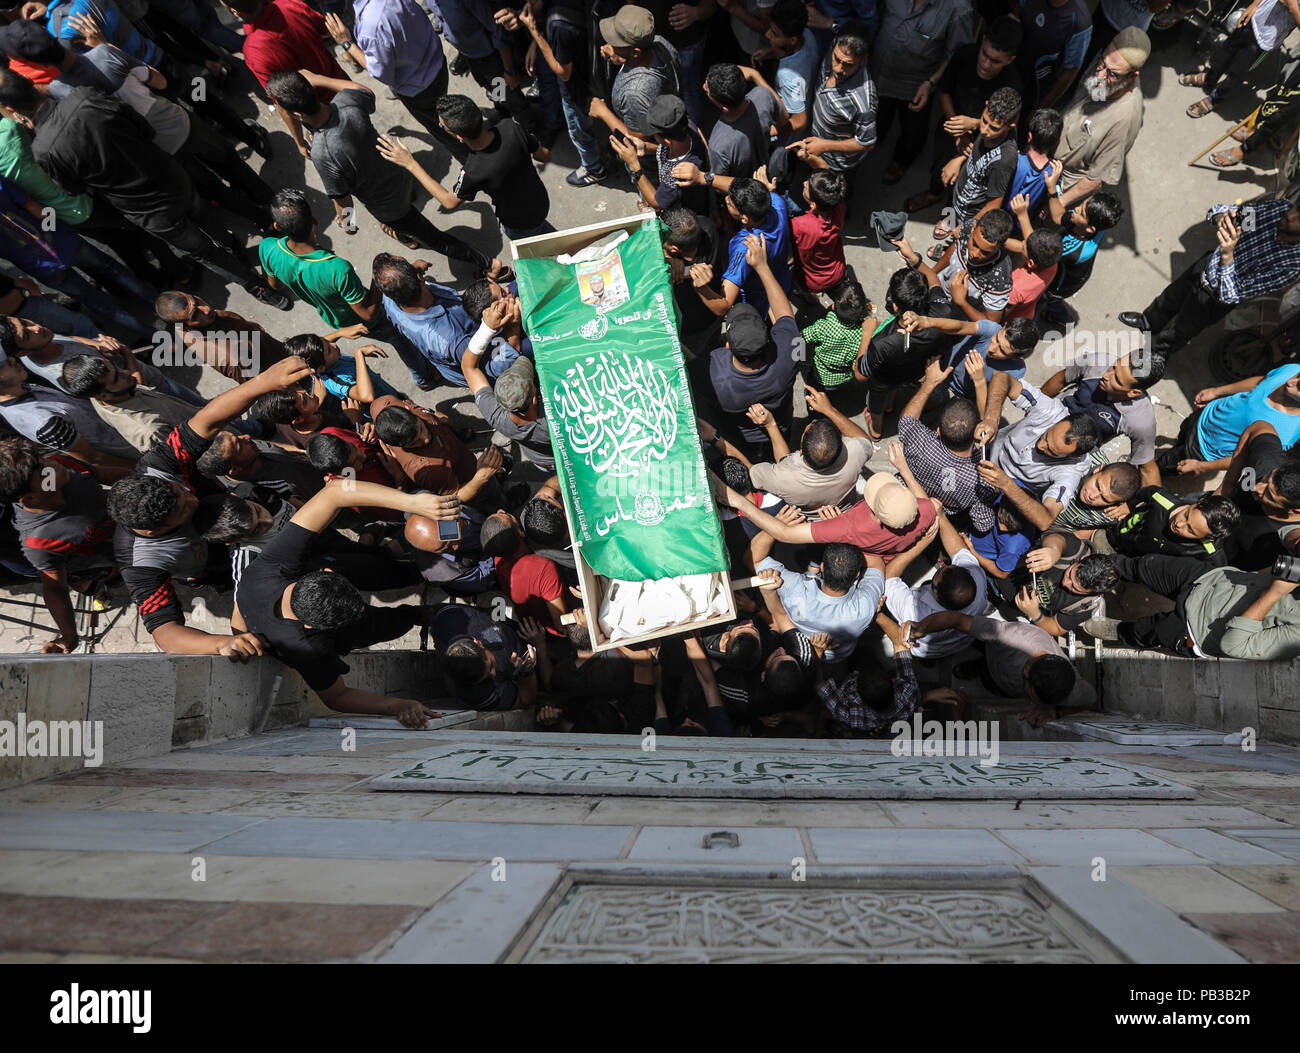 26 July 2018, Palestinian Autonomous Territories, Gaza: Palestinian mourners carry the body of a Kassam brigade fighter killed the day before in Israeli attacks in the coastal strip during his funeral. A few days after a ceasefire was announced, the situation in Gaza has escalated again. Photo: Wissam Nassar/dpa Stock Photo